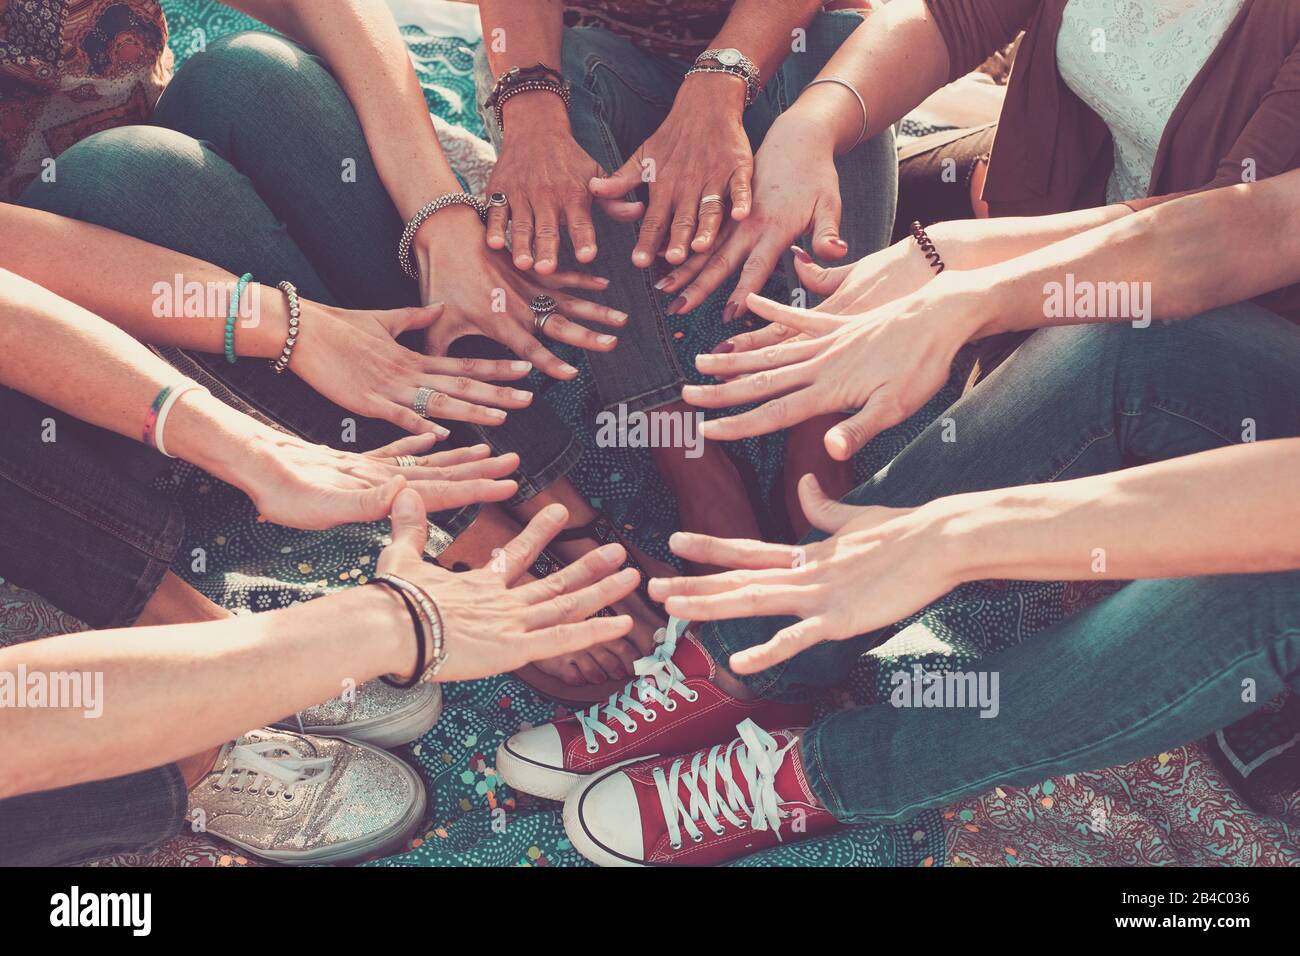 team and friendship concept with crowd of hands and feet all together touching and cooperate - caucasian people friends enjoying the outdoor leisure activity - hippy love Stock Photo